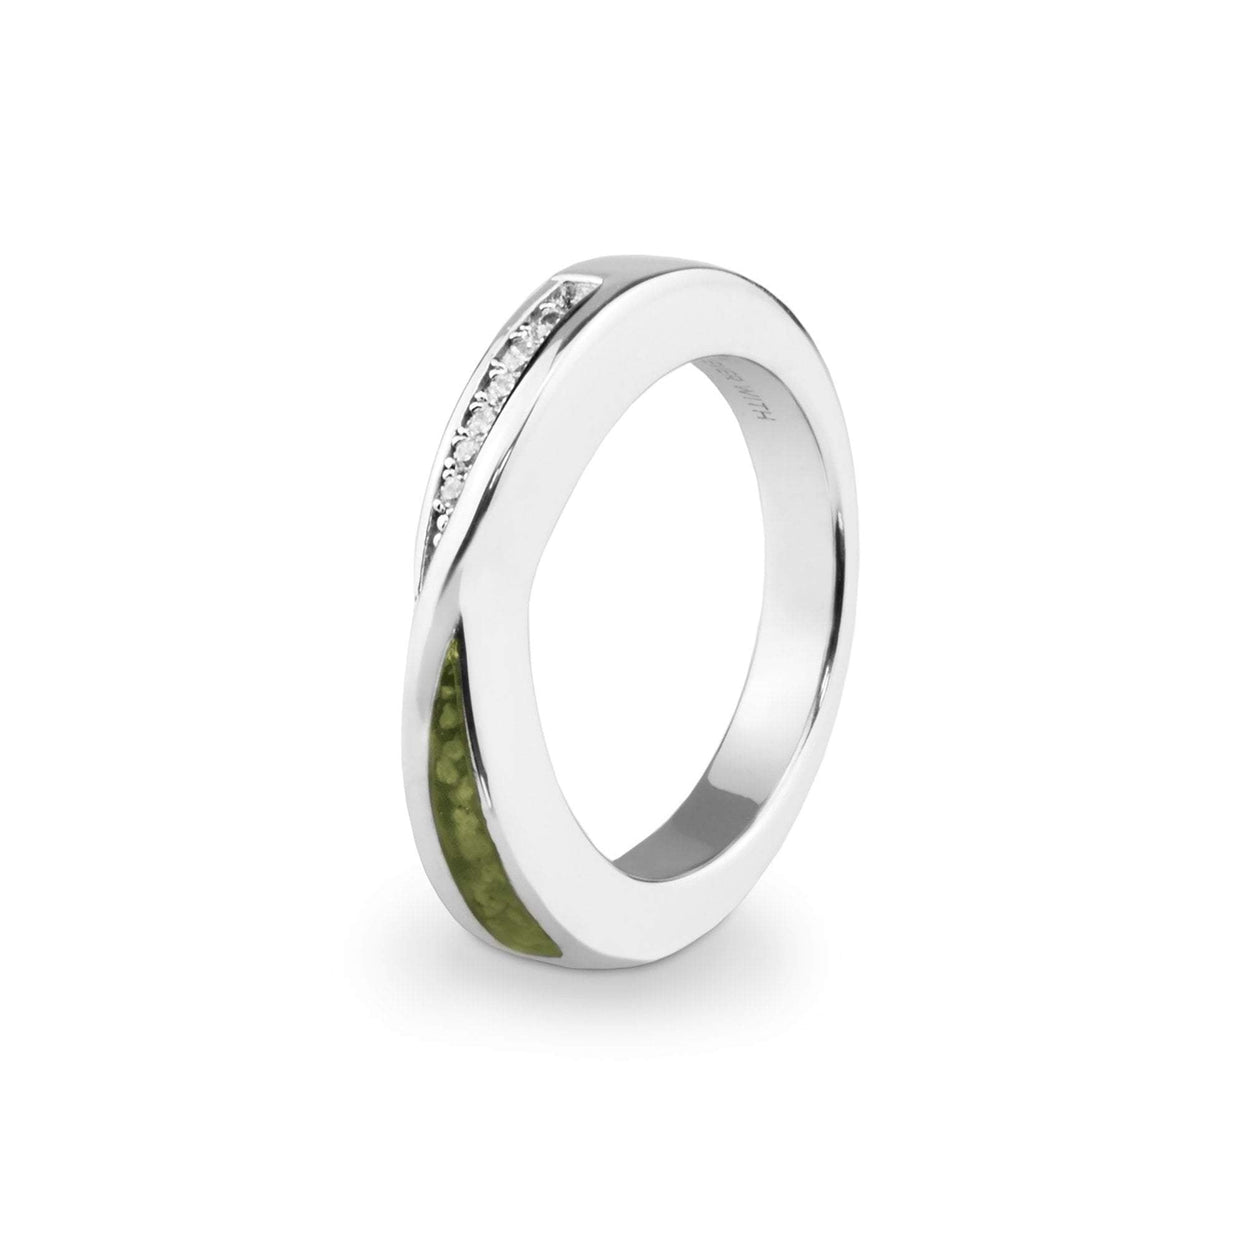 Load image into Gallery viewer, EverWith Ladies Harmony Memorial Ashes Ring with Fine Crystals - EverWith Memorial Jewellery - Trade